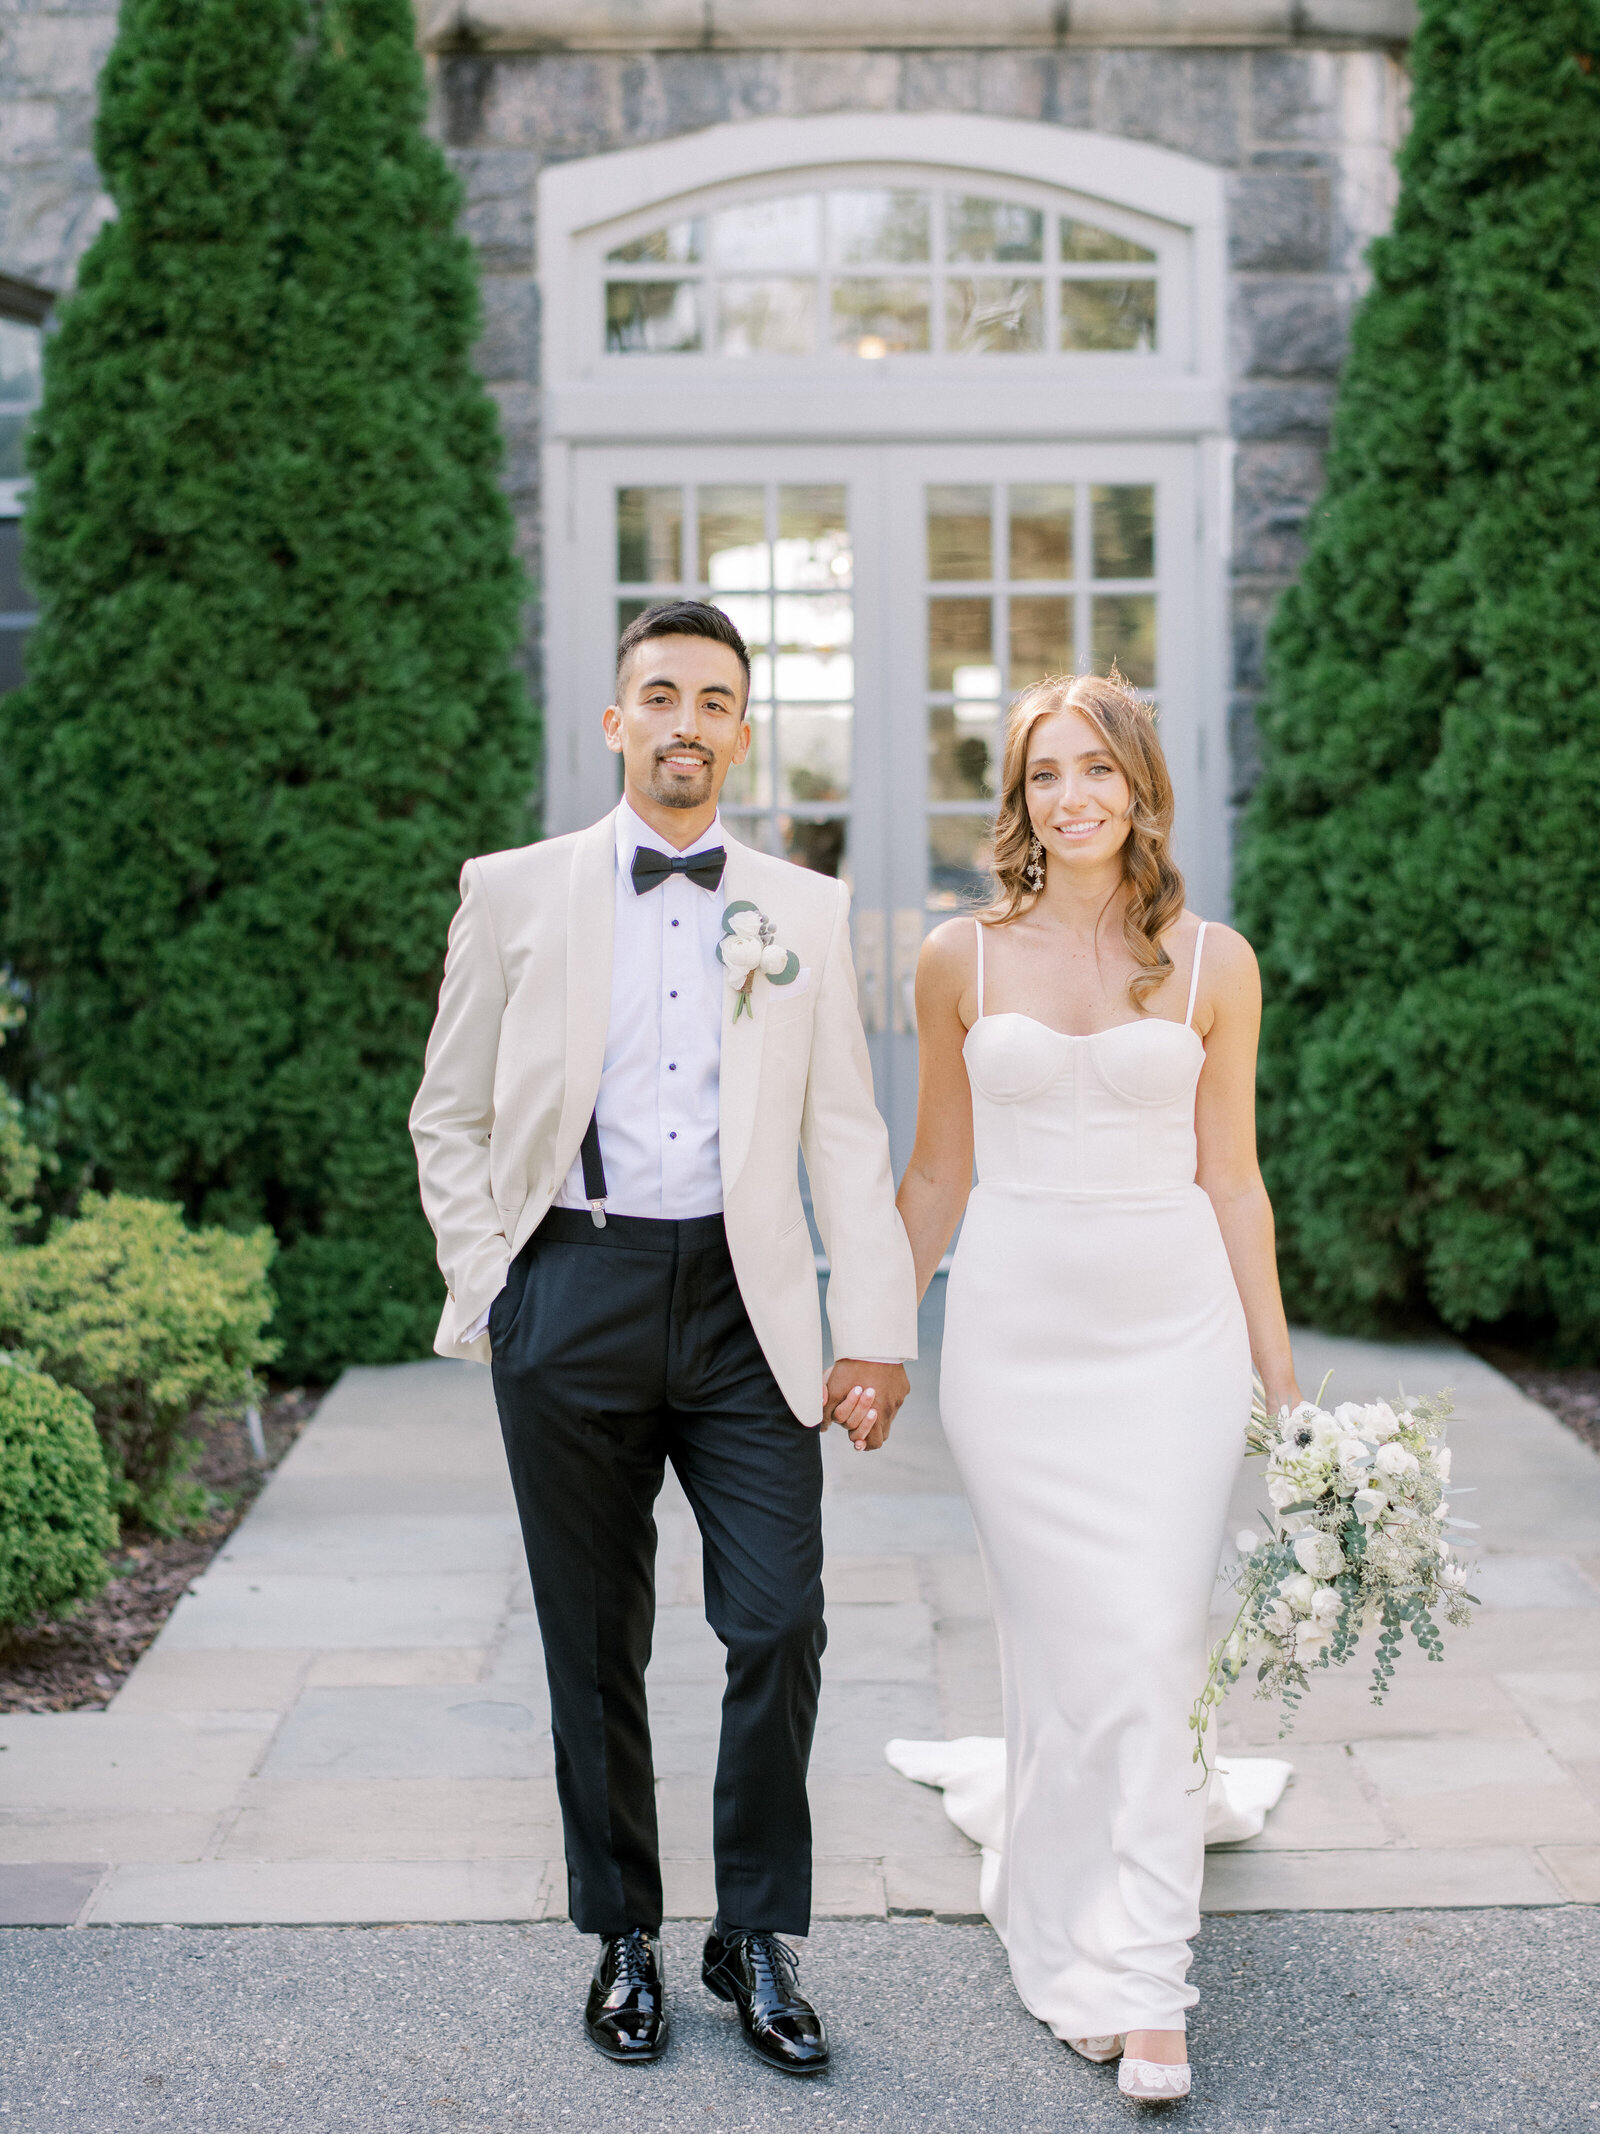 Lindsay Lazare Photography New York Wedding Engagement Photographer Hudson Valley Destination Travel Intentional Timeless Connection Drive Luxury Heirloom Photographs Photos  LLP_4652